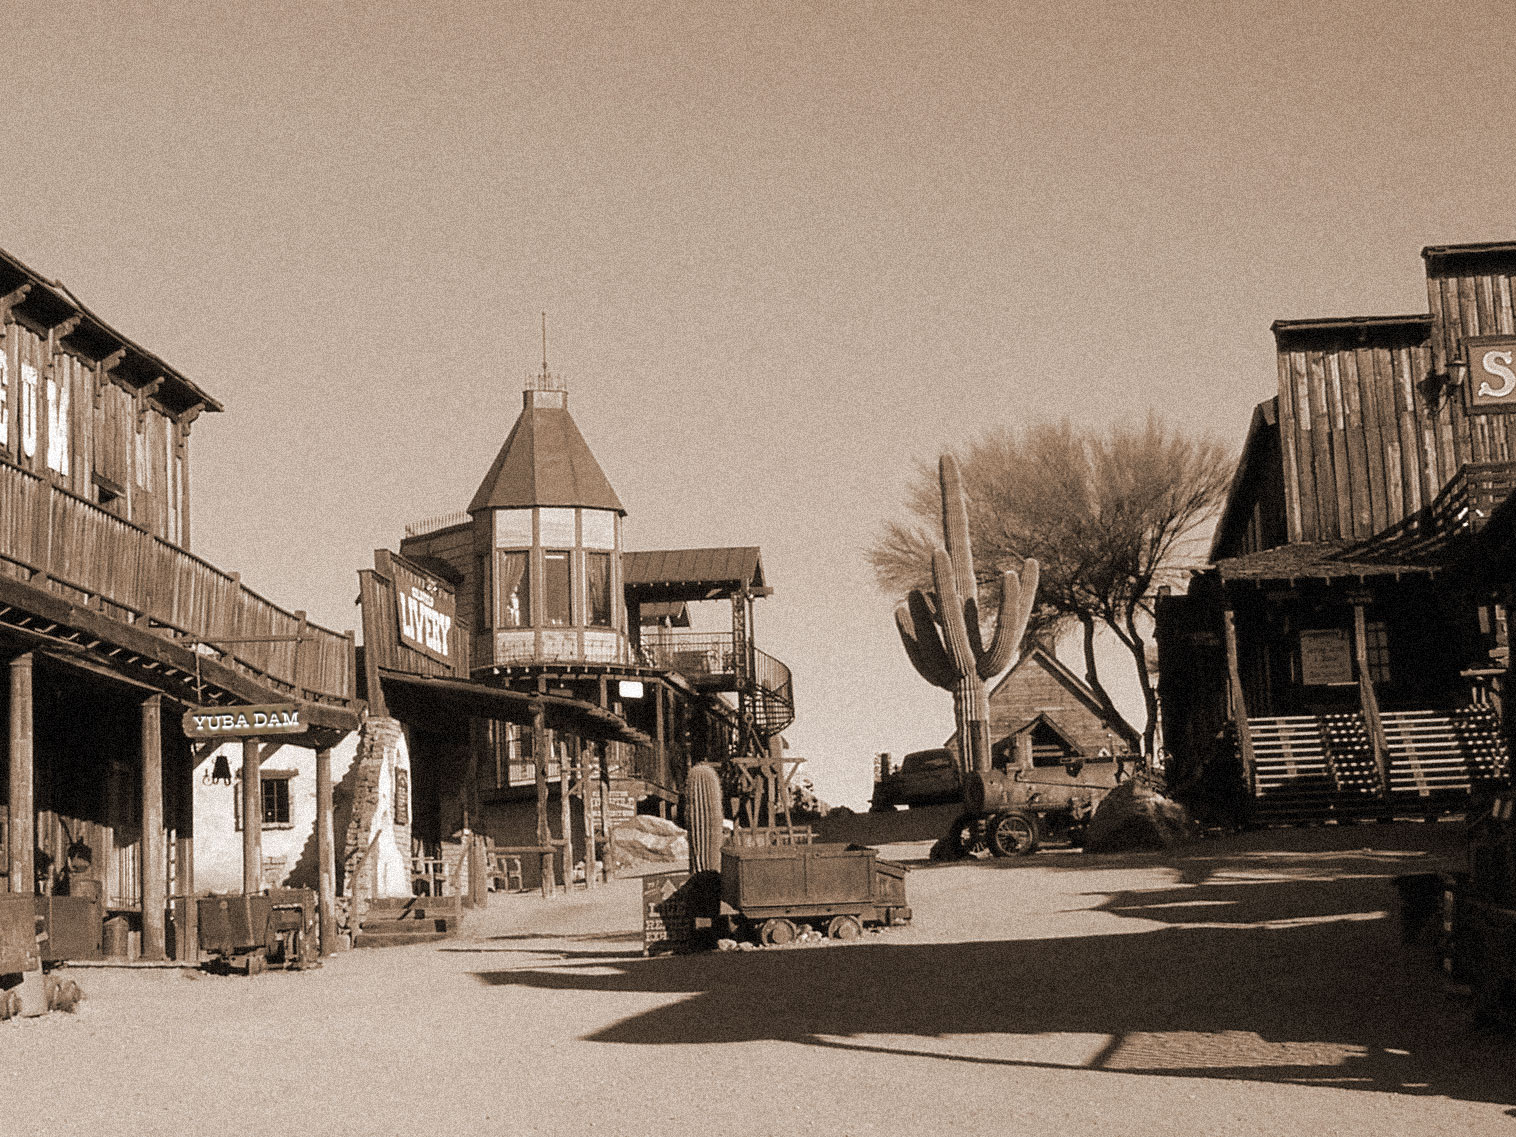 A town in the Old West with a sign reading 'Yuba Dam'